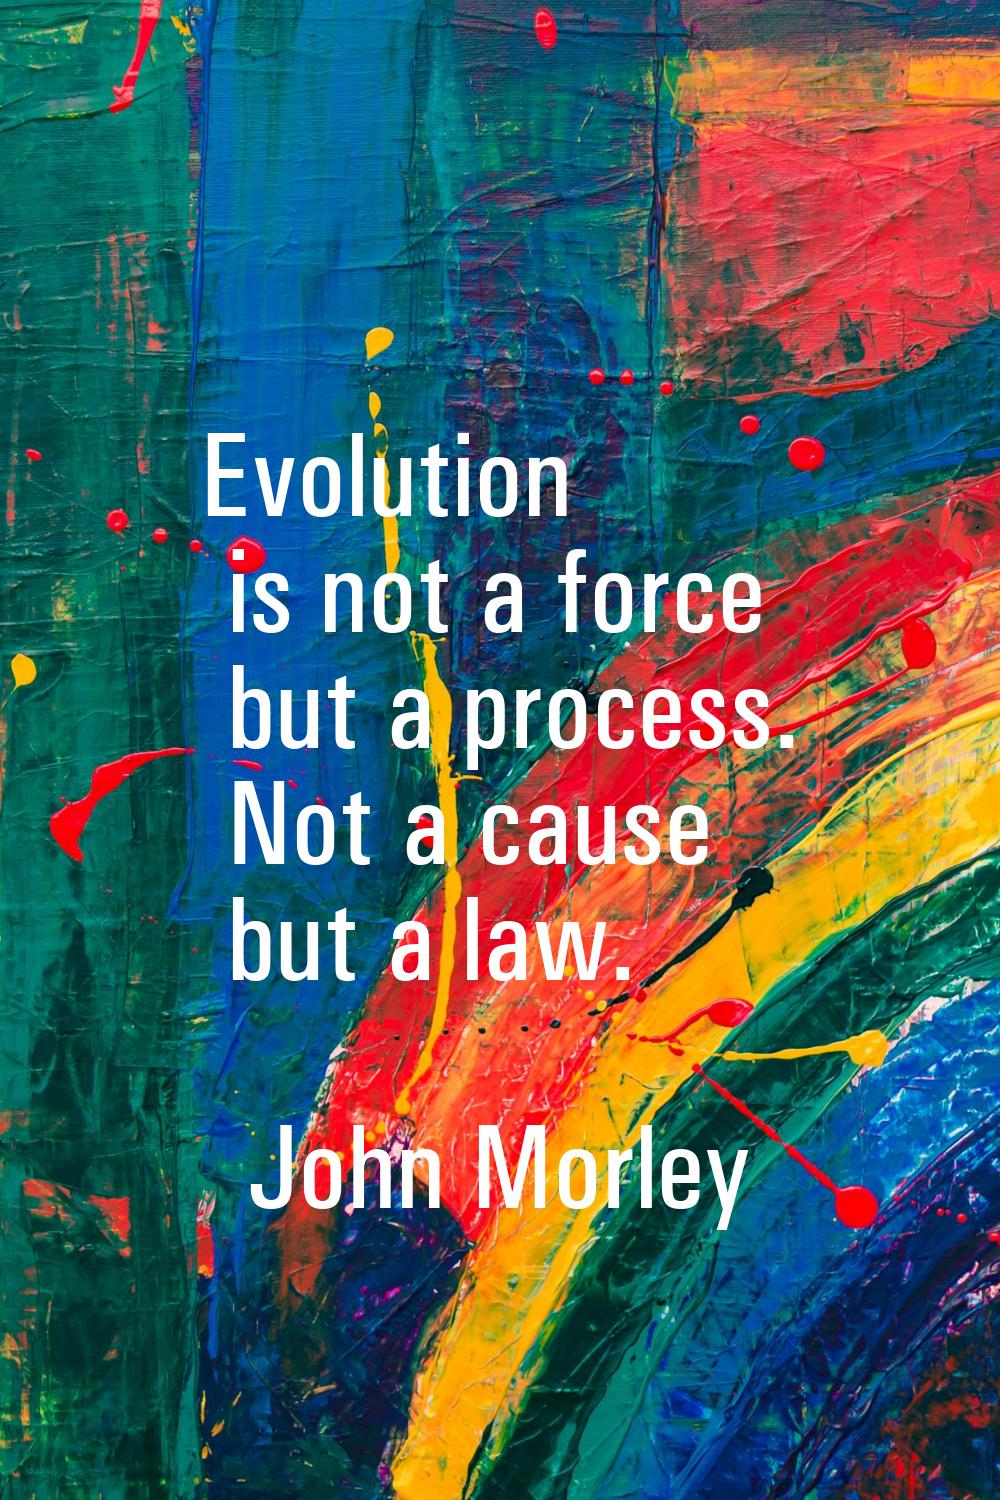 Evolution is not a force but a process. Not a cause but a law.